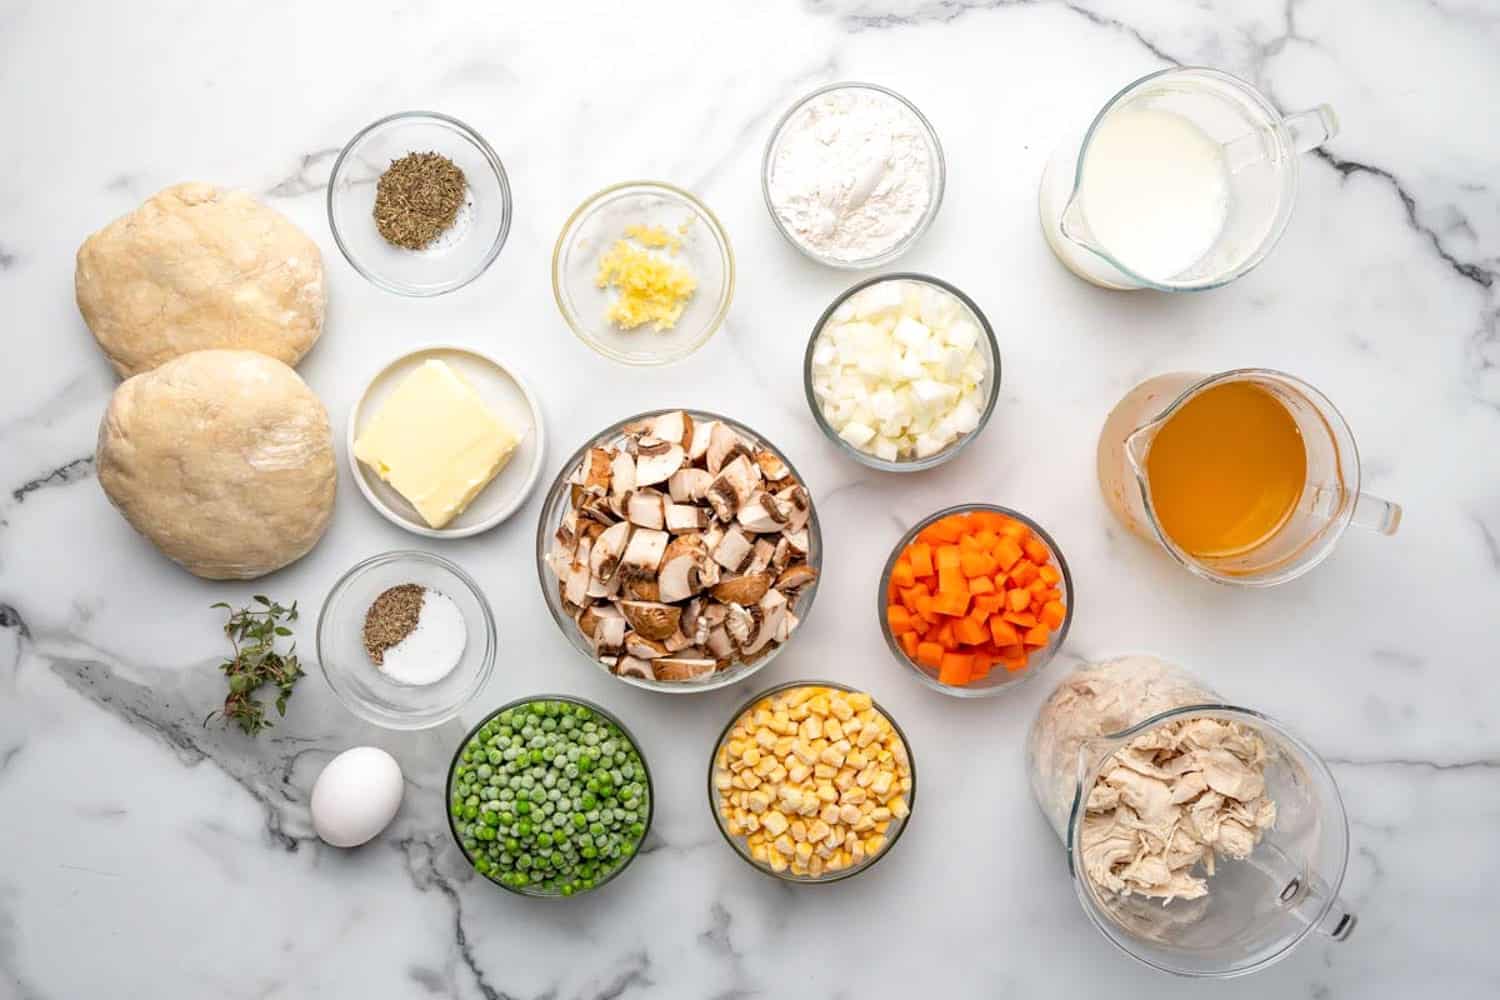 The ingredients needed to make a homemade chicken pot pie